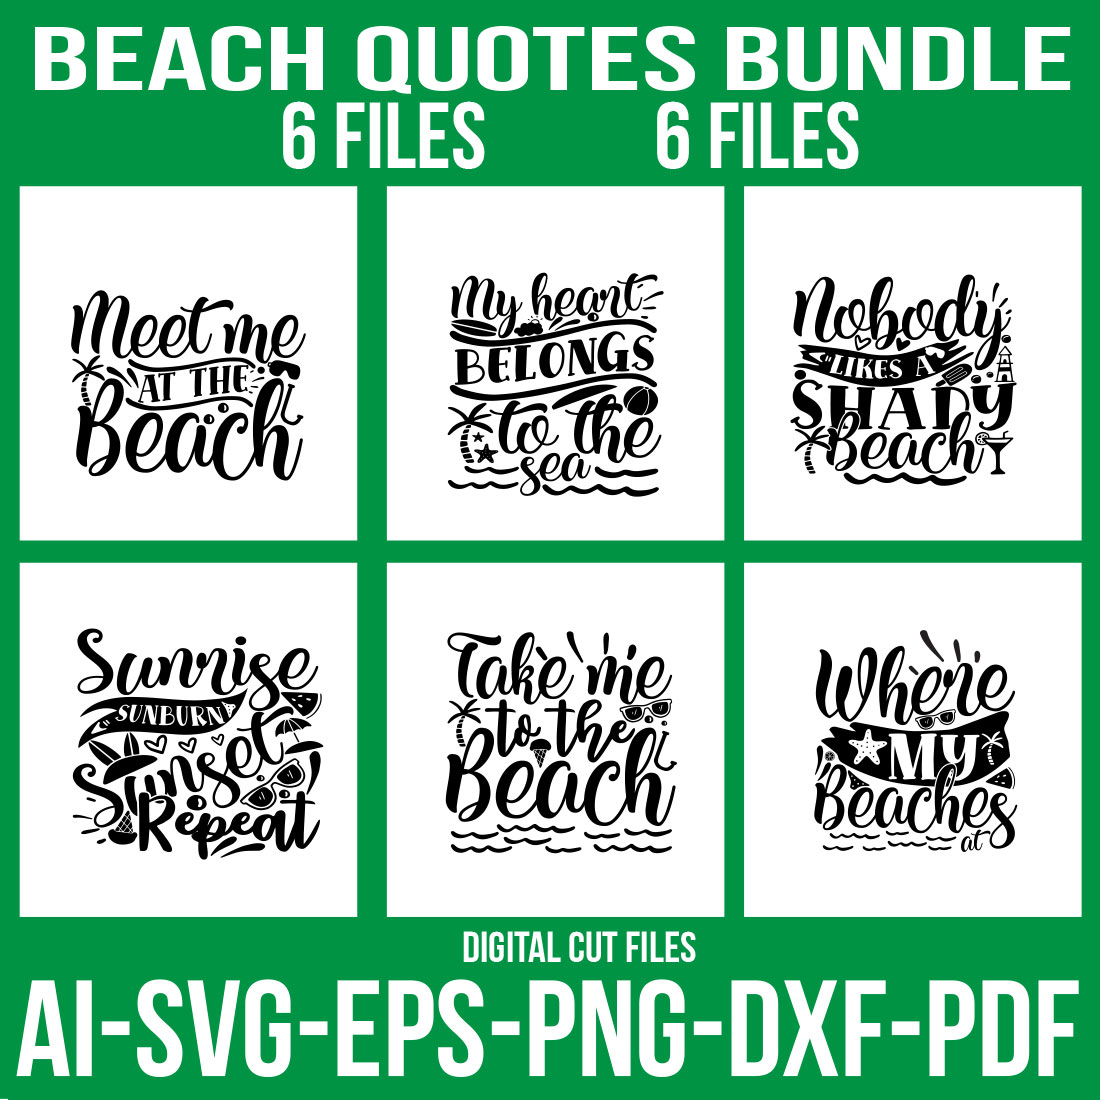 Beach Quotes Bundle cover image.